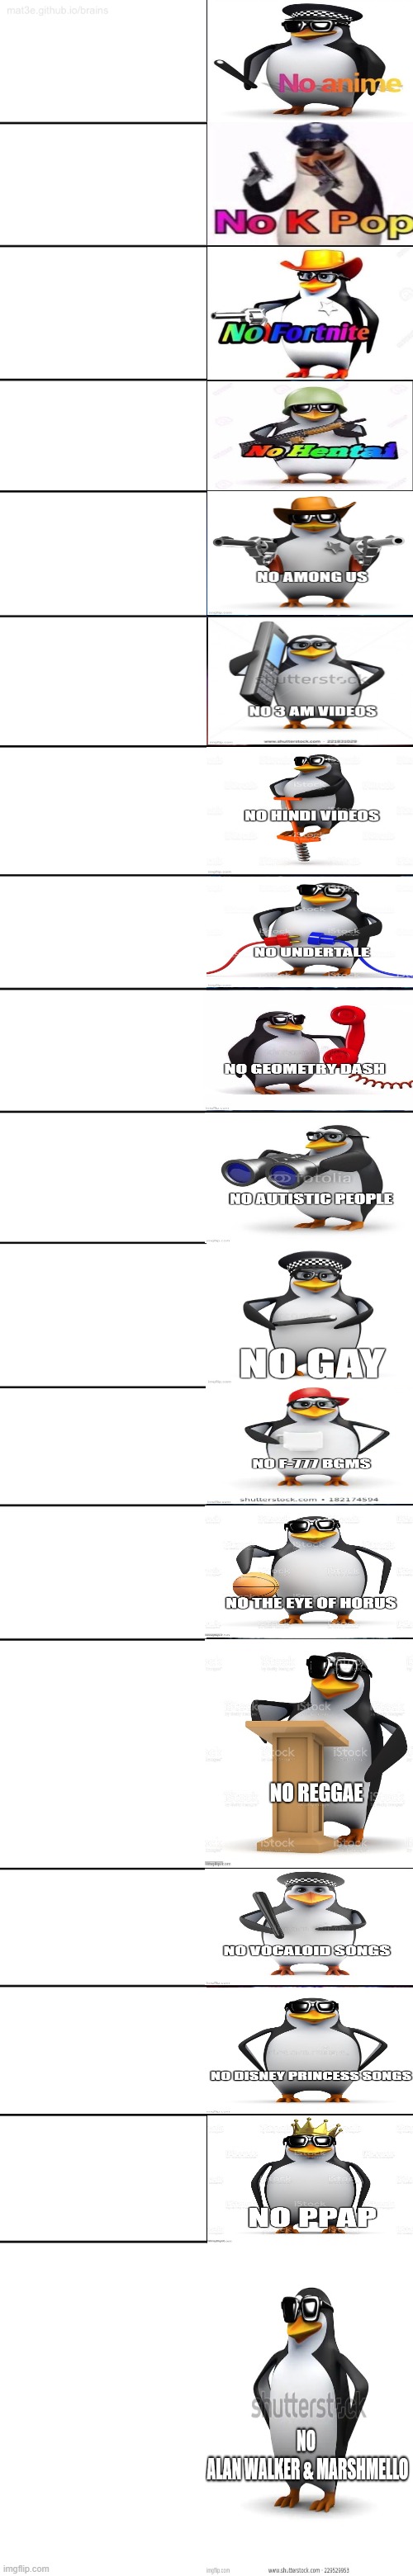 High Quality NO anime penguin expaning Blank Meme Template